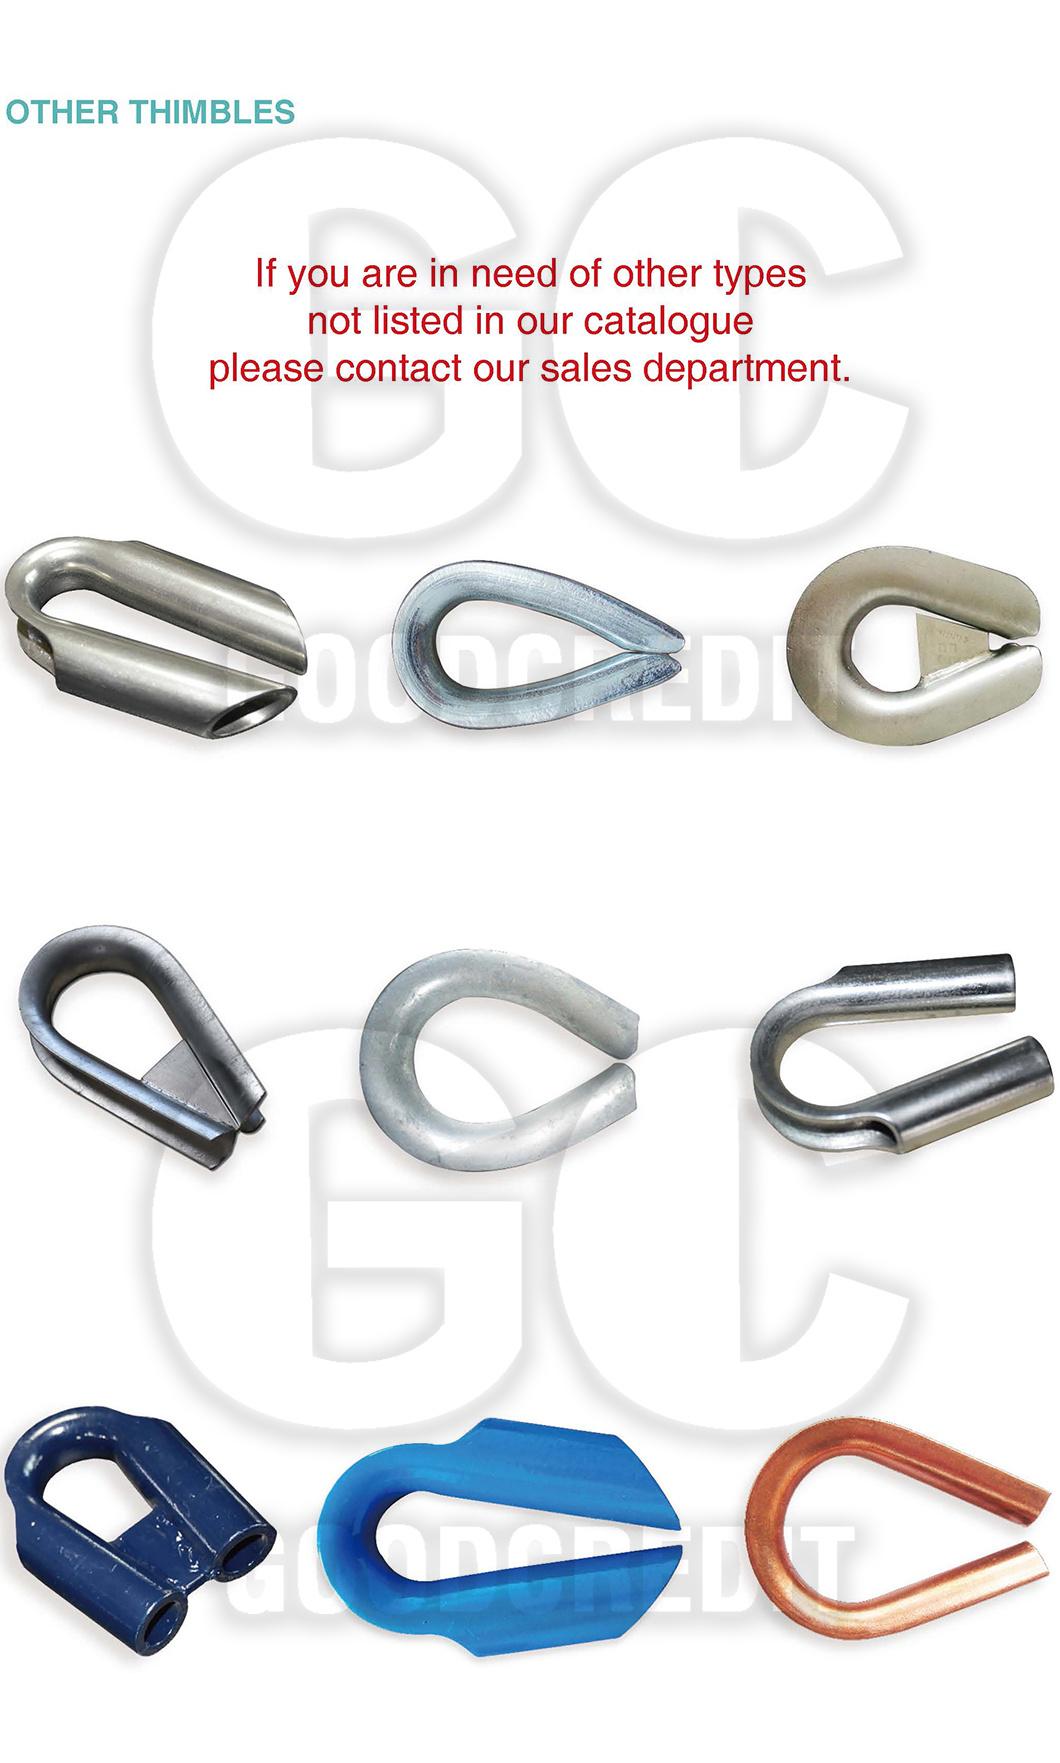 G408 G411 G414 S412 BS464 DIN6899 Heavy Duty Wire Rope Thimble